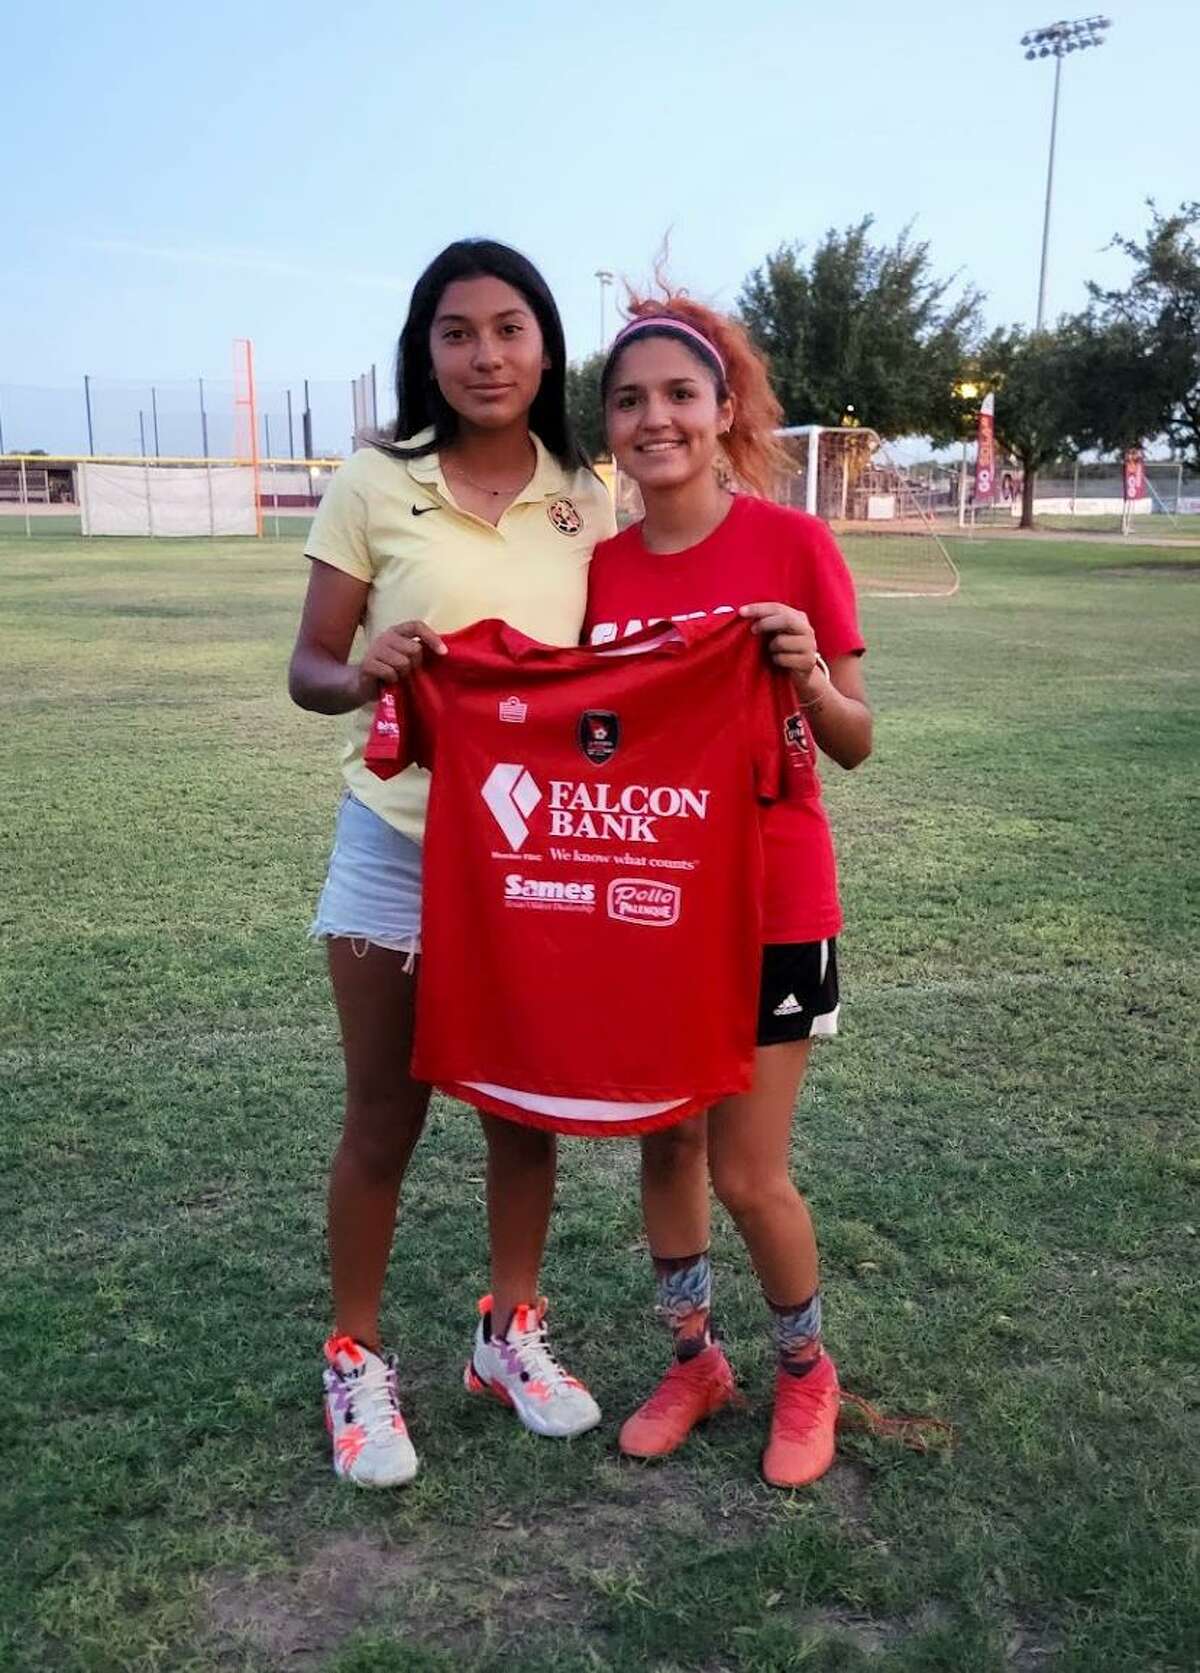 Bianca, 23, and Mayte, 16, have both been playing soccer for 13 years and have played together both formally and informally while growing up in Nuevo Laredo.